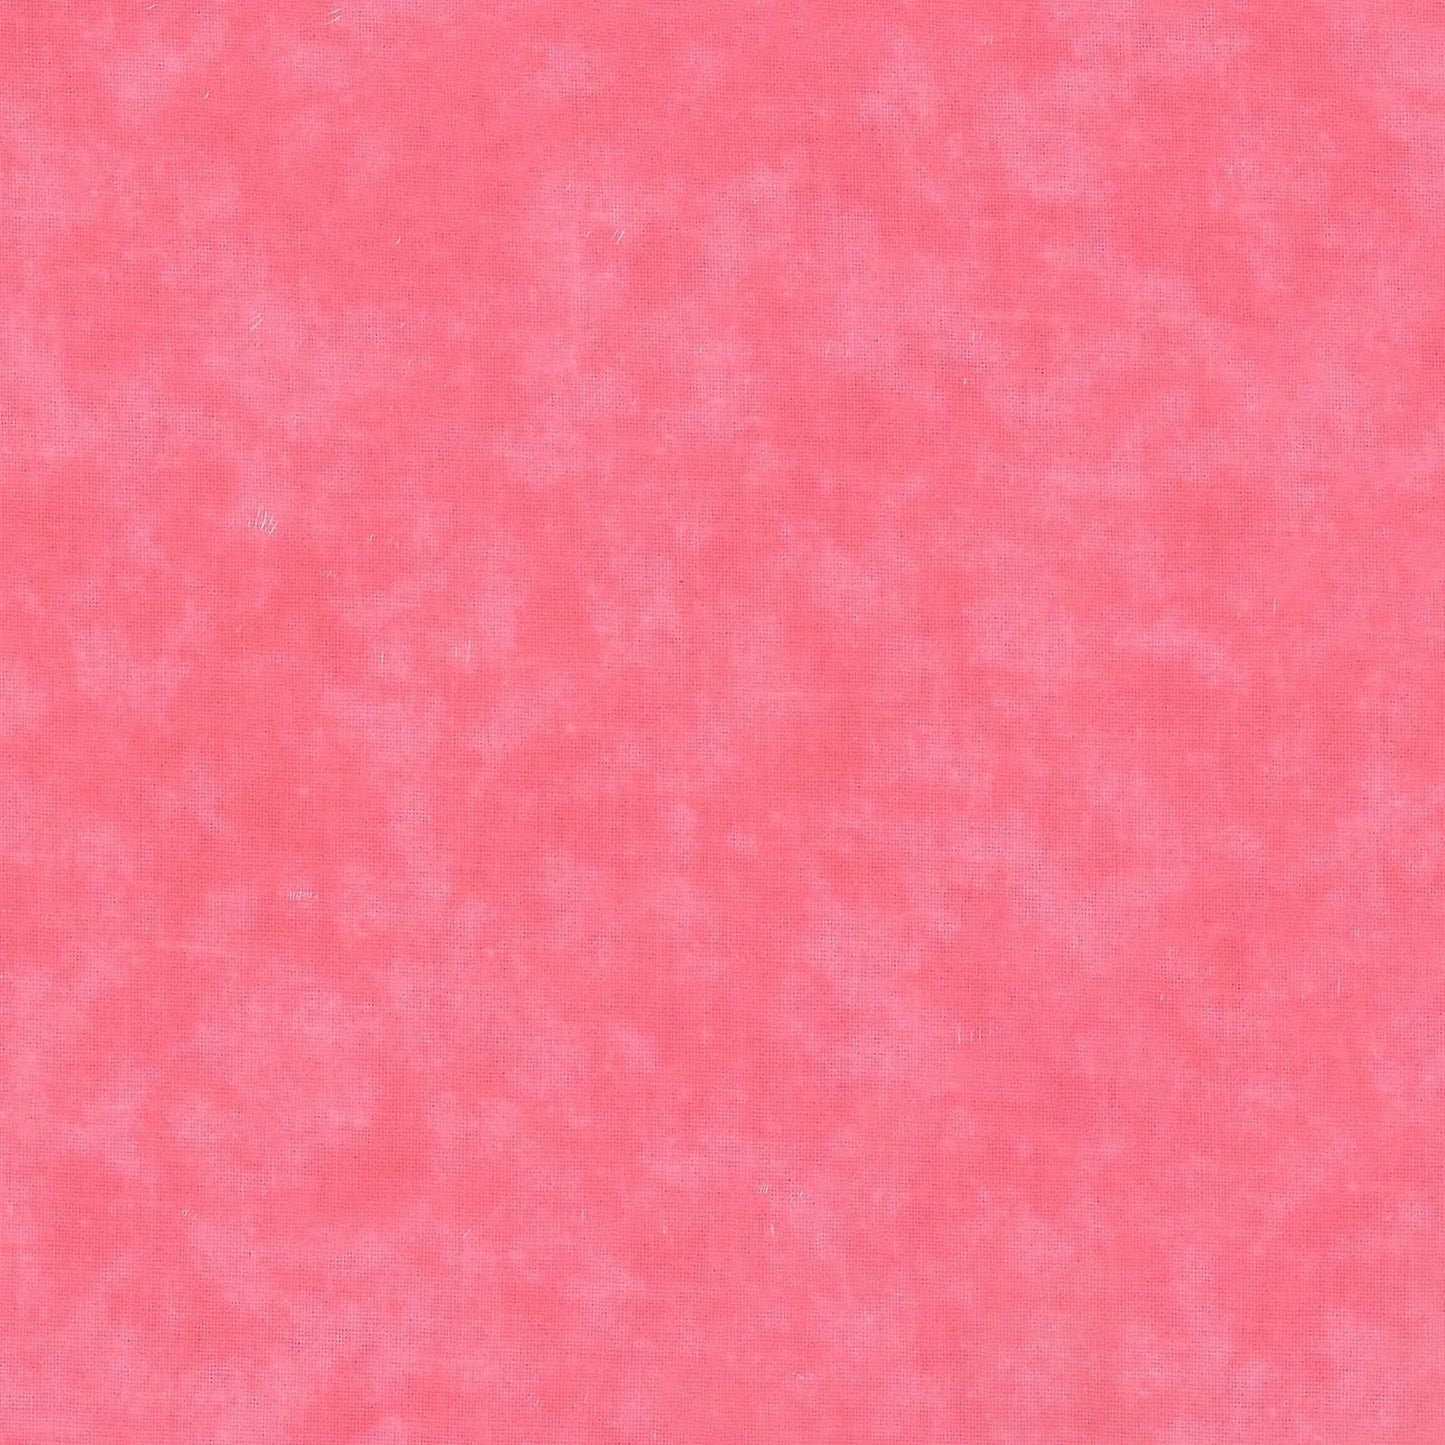 43-44" Wide CLOUD NINE Made in the USA Bright Pink Tonal Quilt Fabric - Sold by the Yard